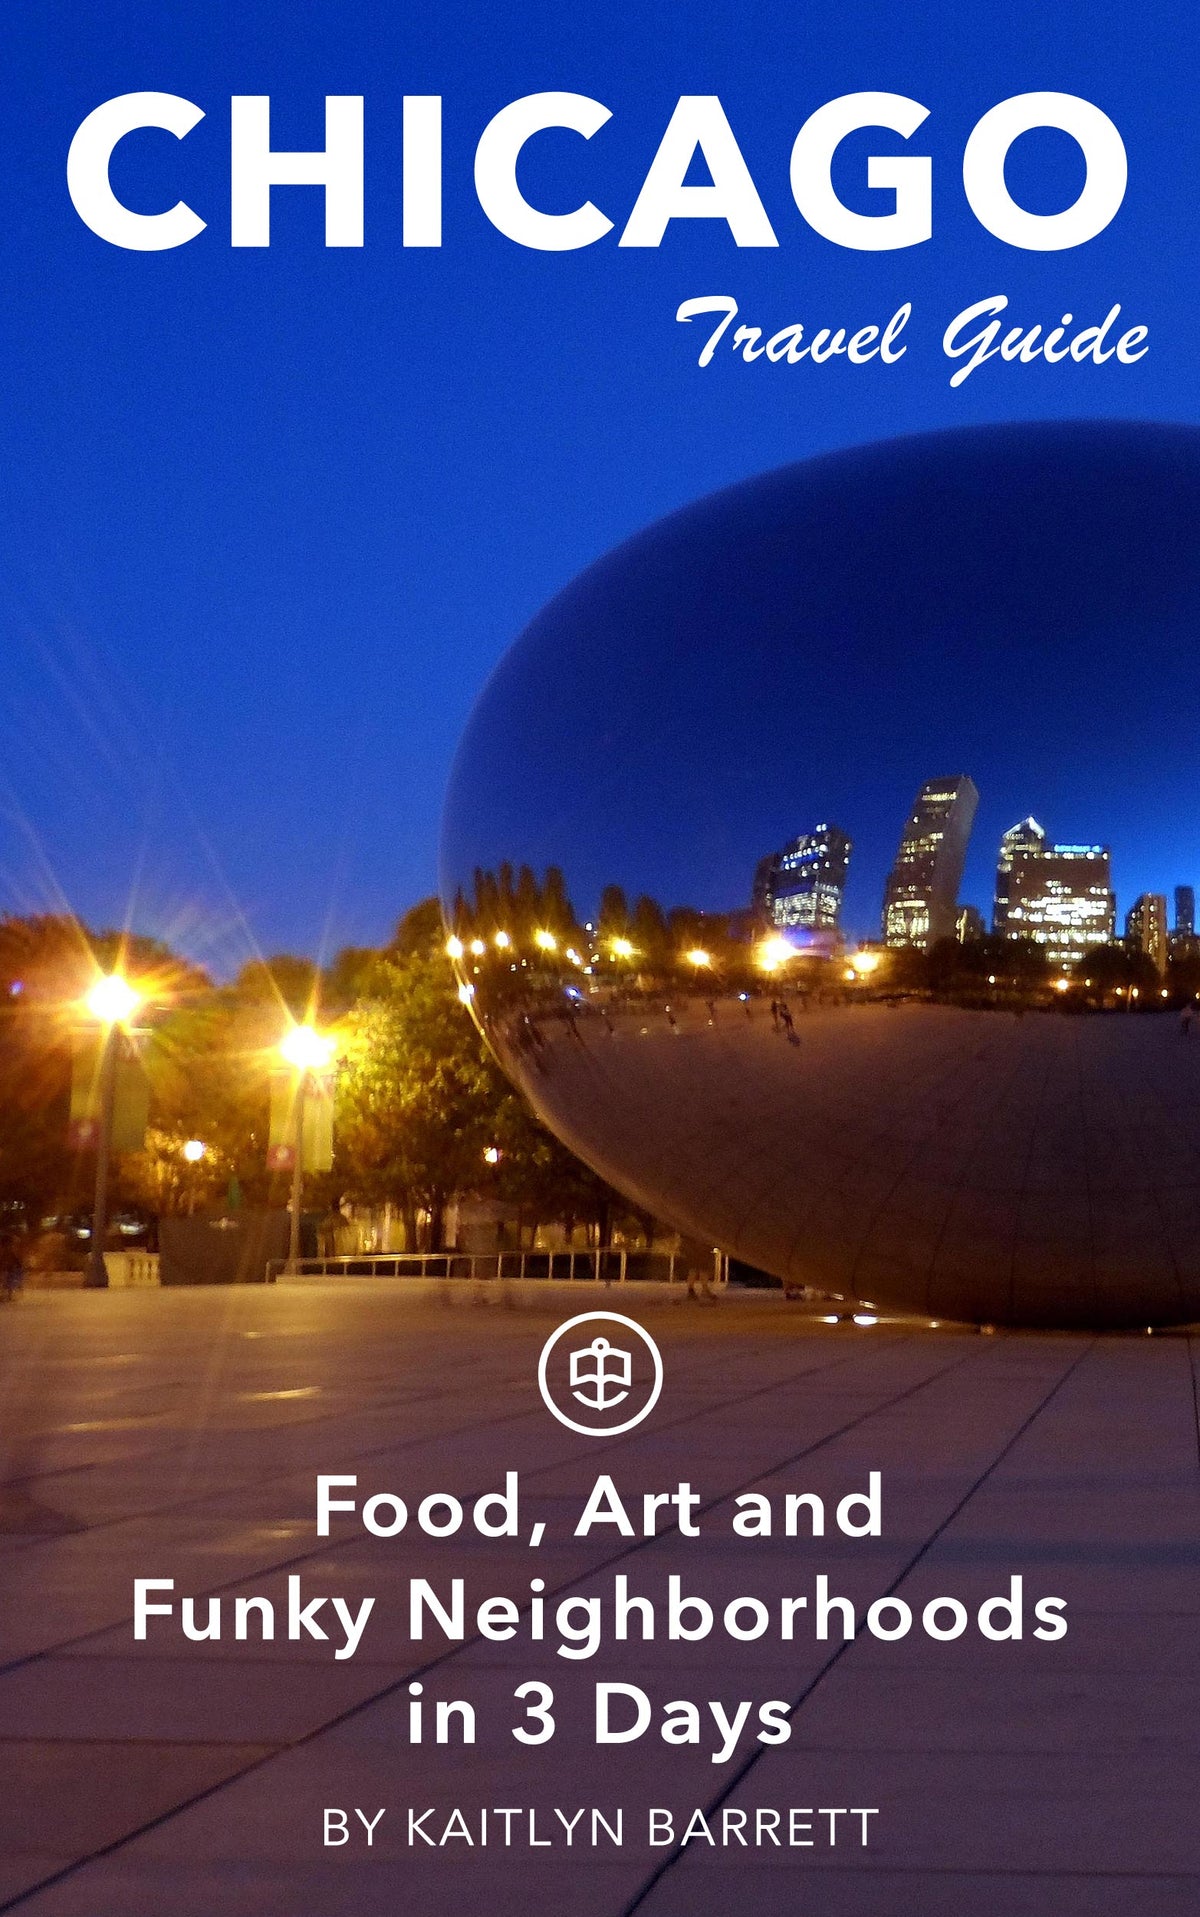 Chicago Food, Art and Funky Neighborhoods in 3 Days